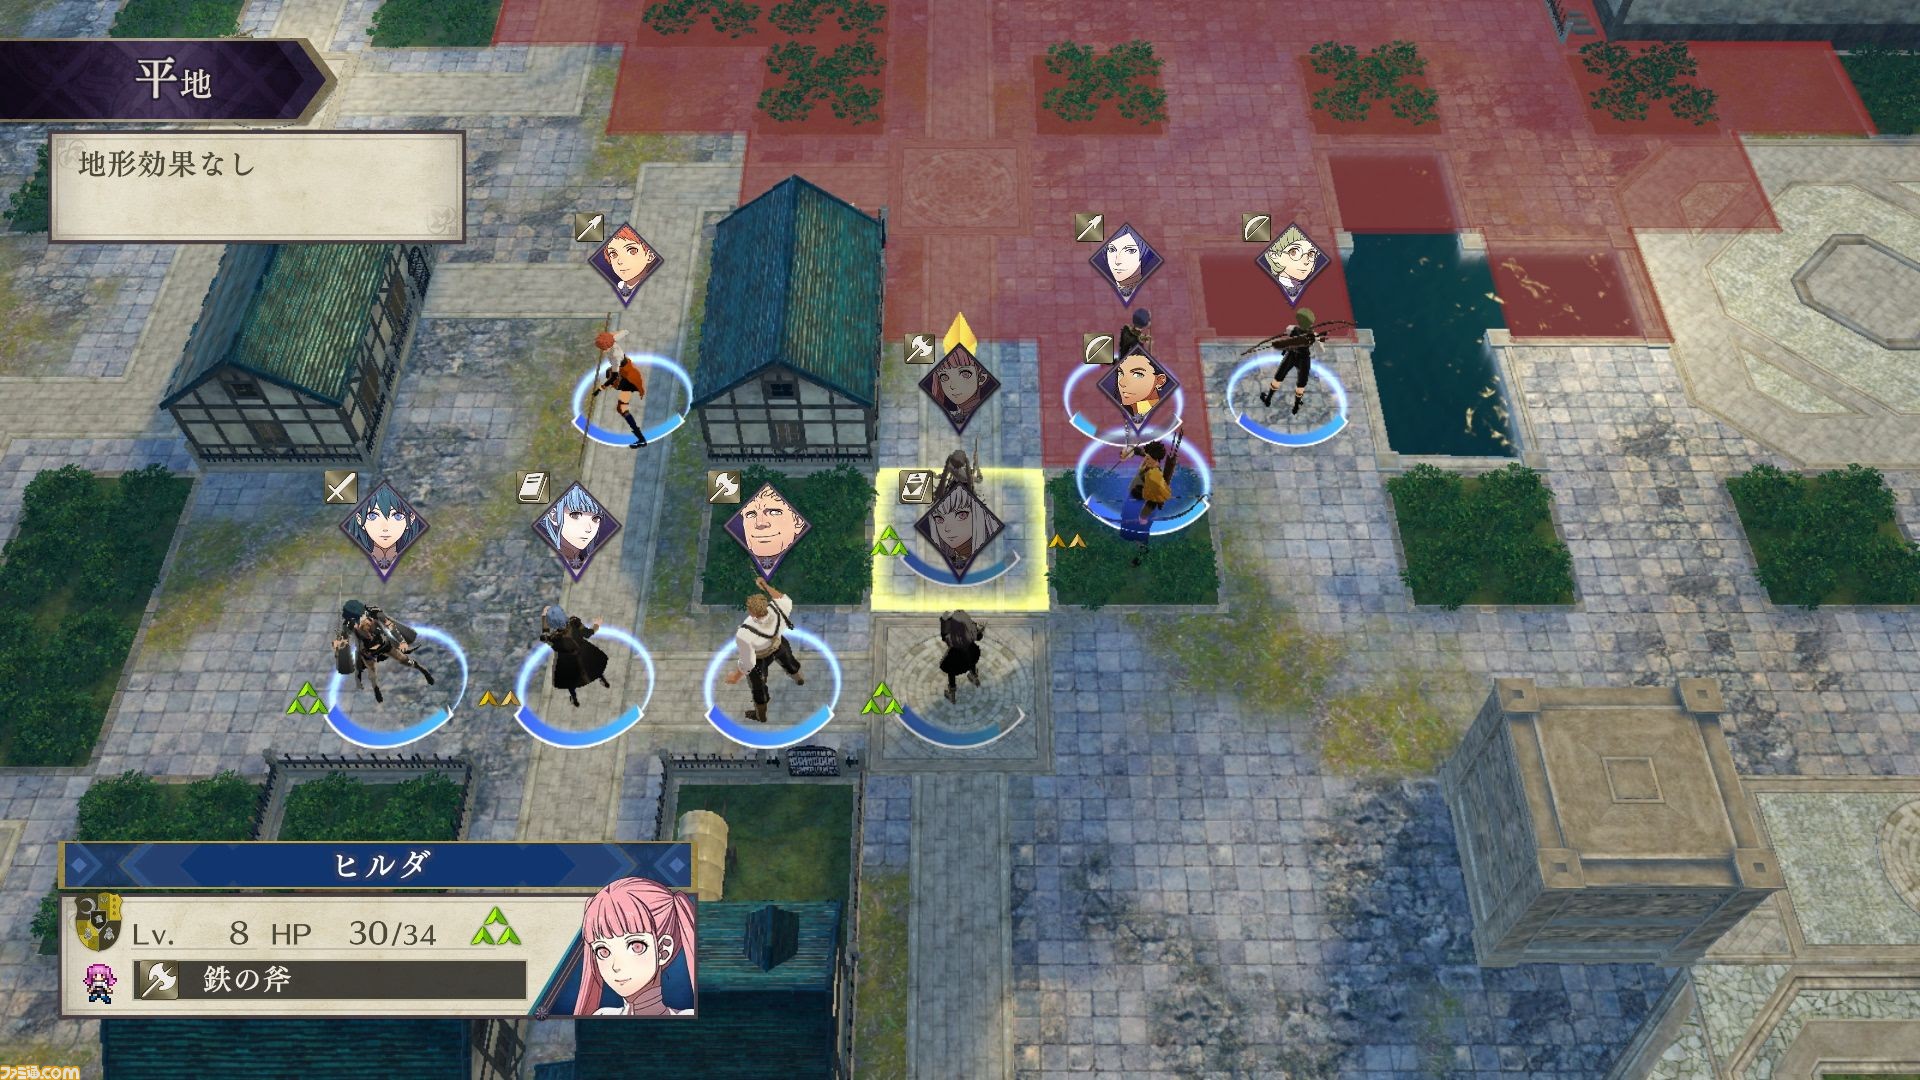 https://www.perfectly-nintendo.com/wp-content/uploads/sites/1/nggallery/fire-emblem-three-houses-25-04-2019-1/58.jpg